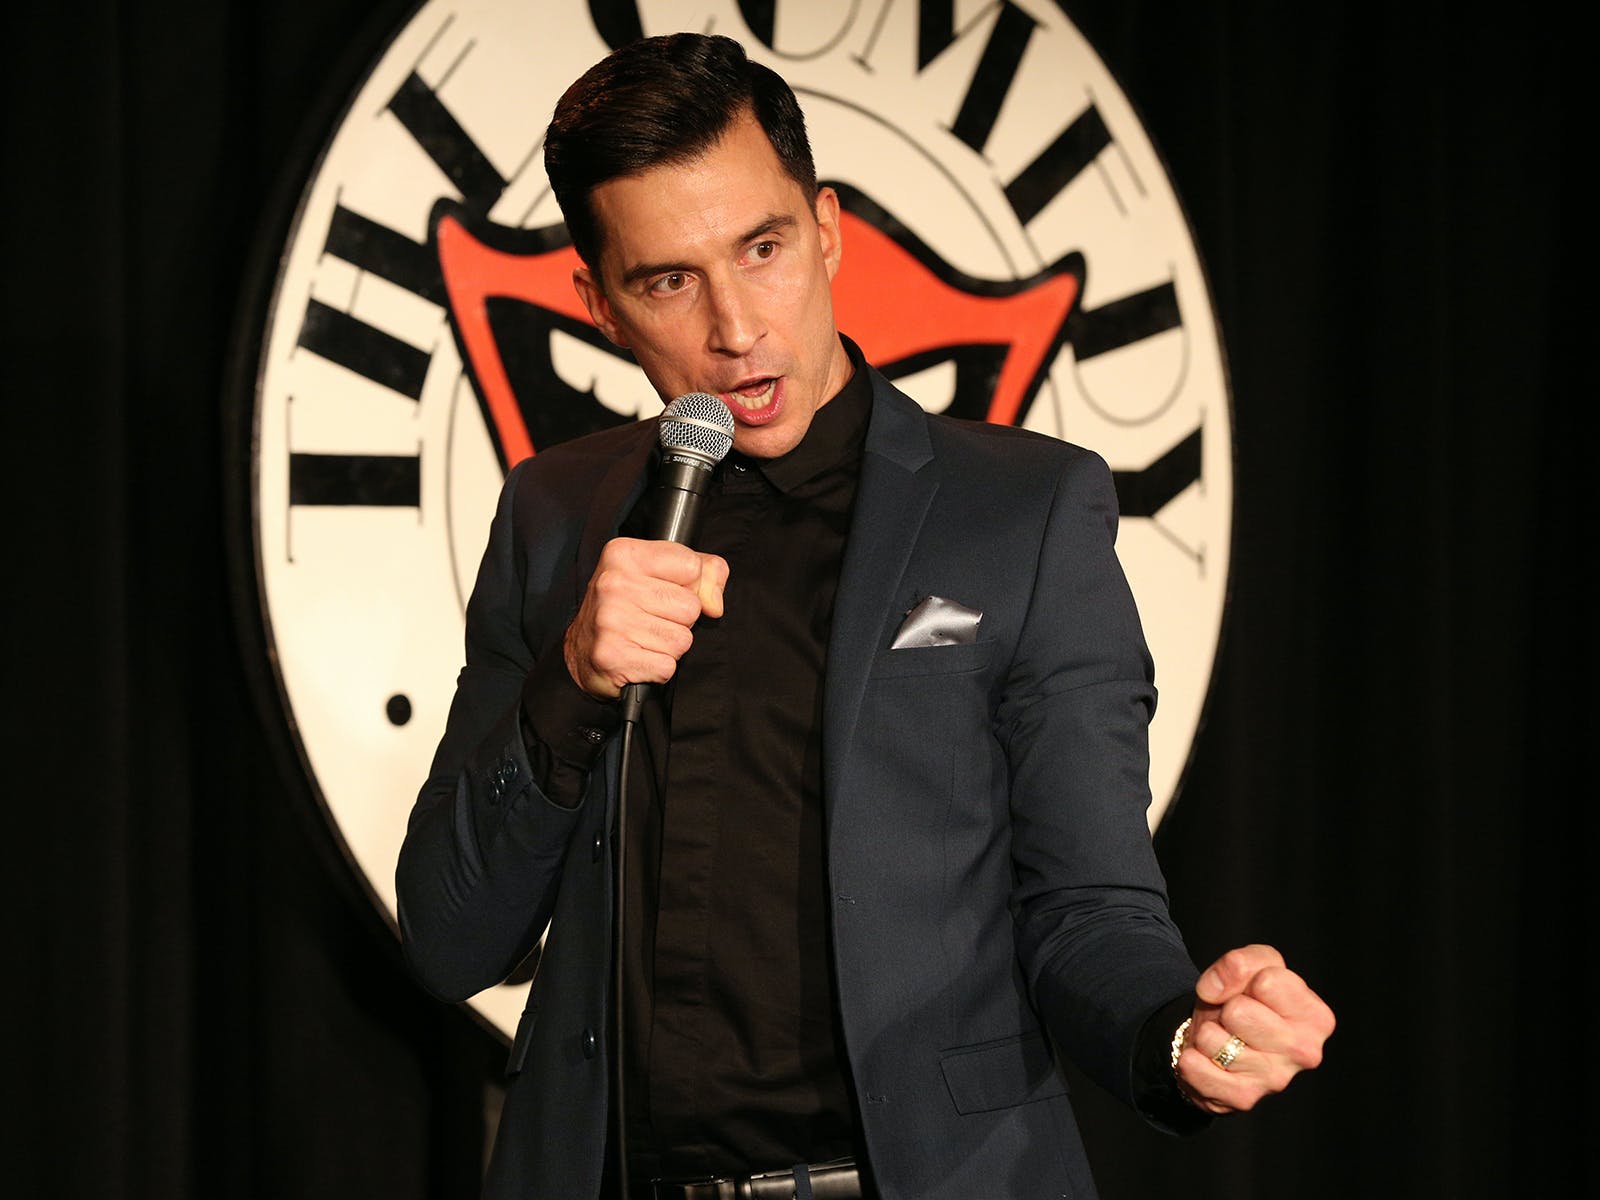 Best in Stand Up photo from the show